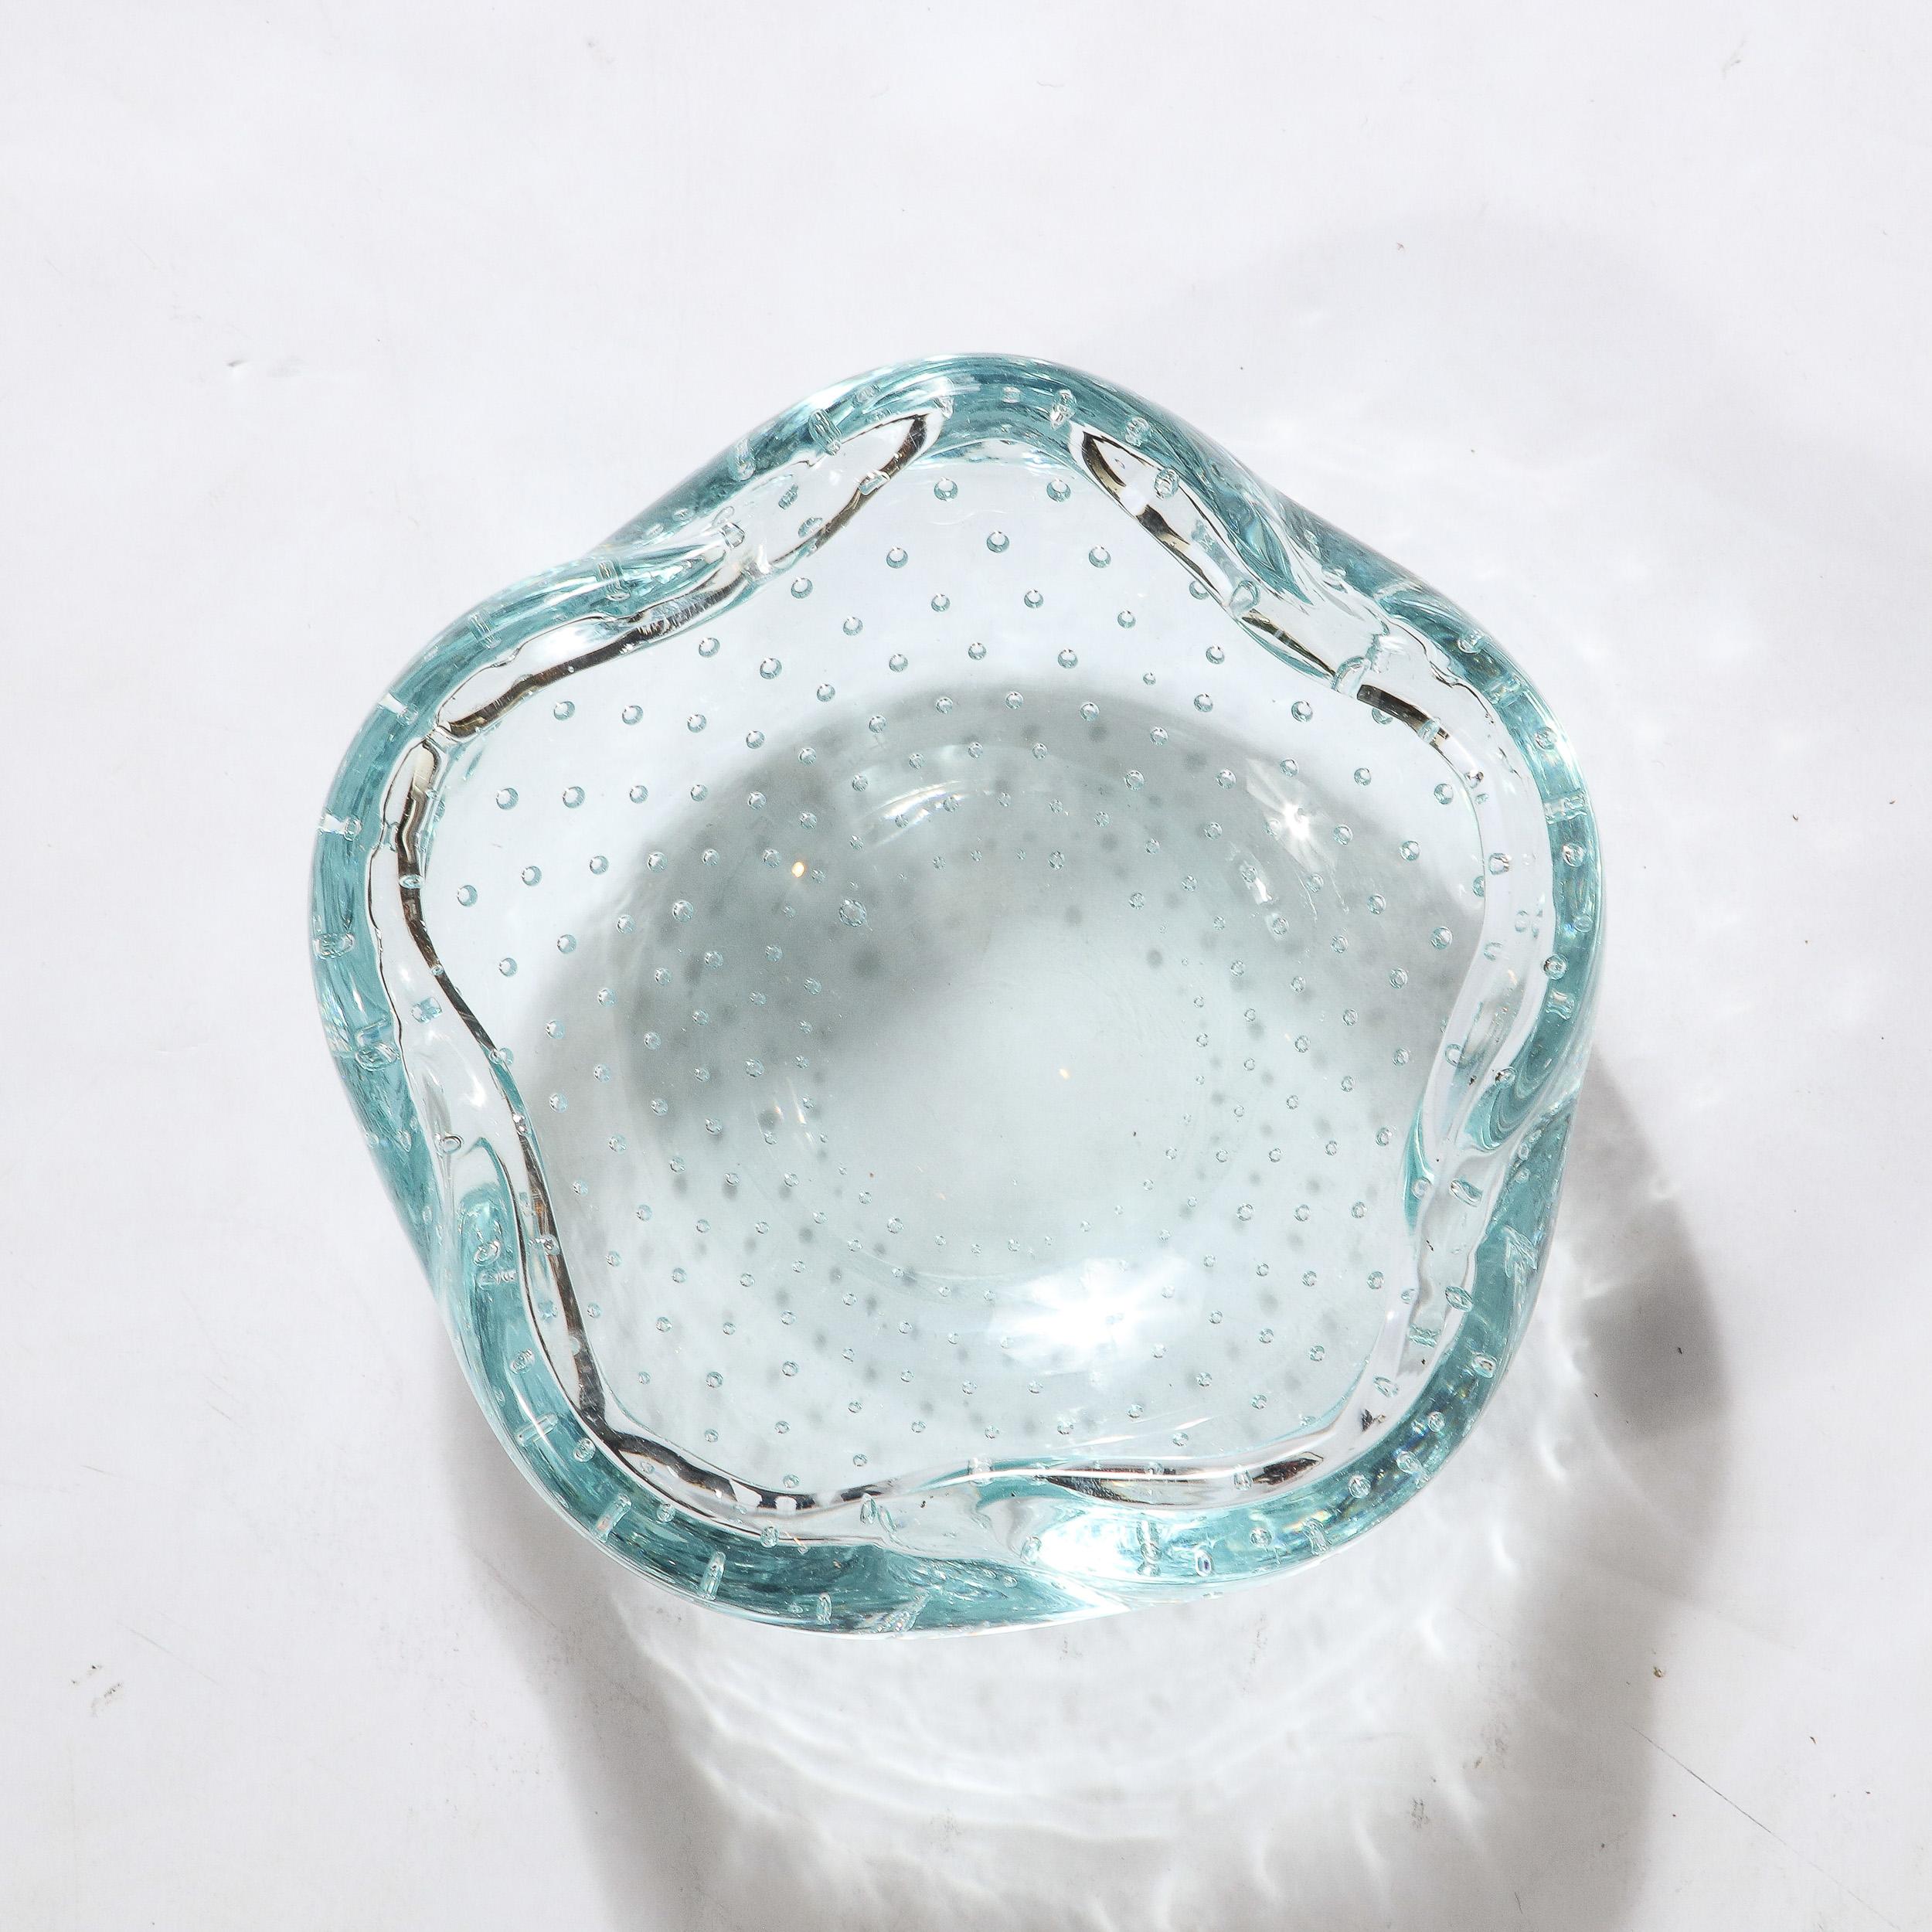 This stunning Mid-Century Modernist Pale Blue Hand-Blown Glass Dish with Bullicante Detailing signed Daum originates from France, Circa 1960. Daum, founded in 1878 by Jean Daum has been known since it's conception and to this day for producing